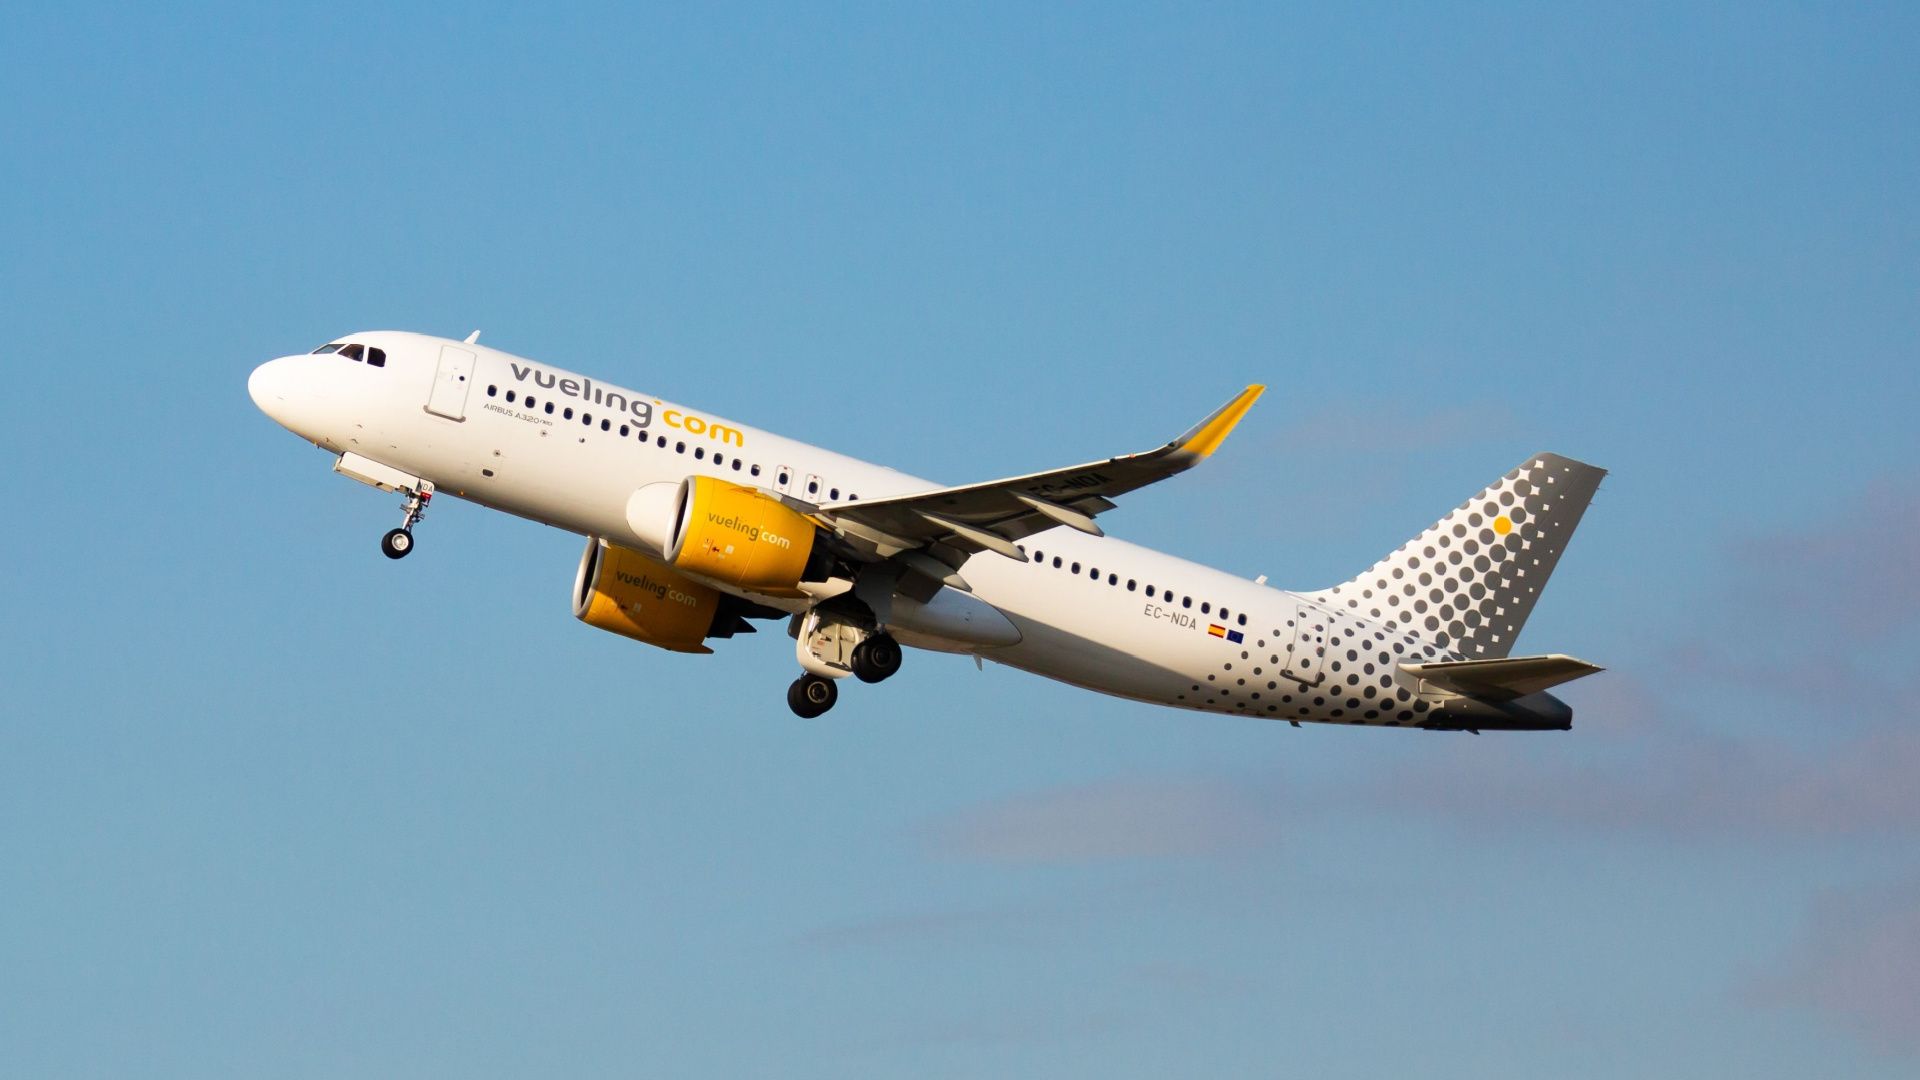 Vueling Airbus A320